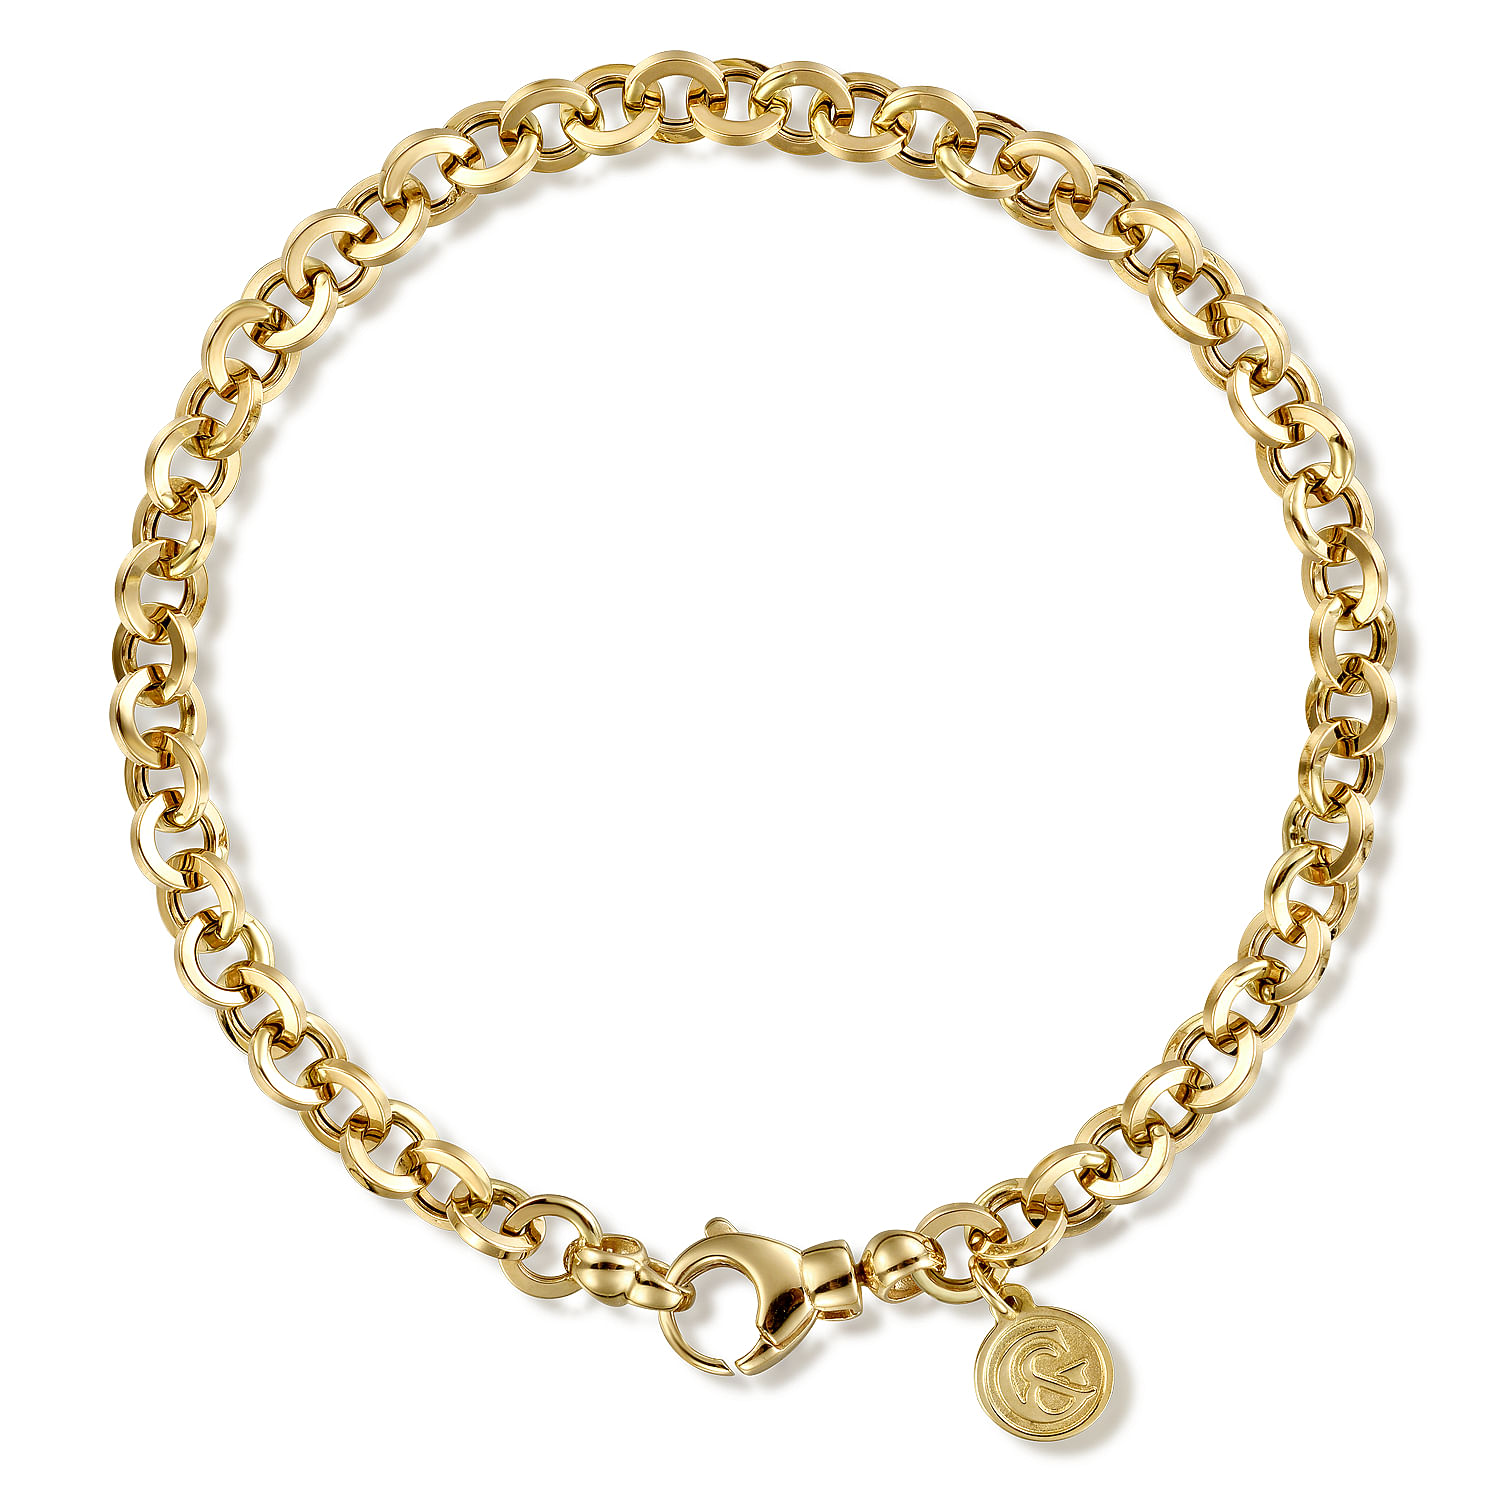 7 Inch 14K Yellow Gold Hollow Link Chain Bracelet